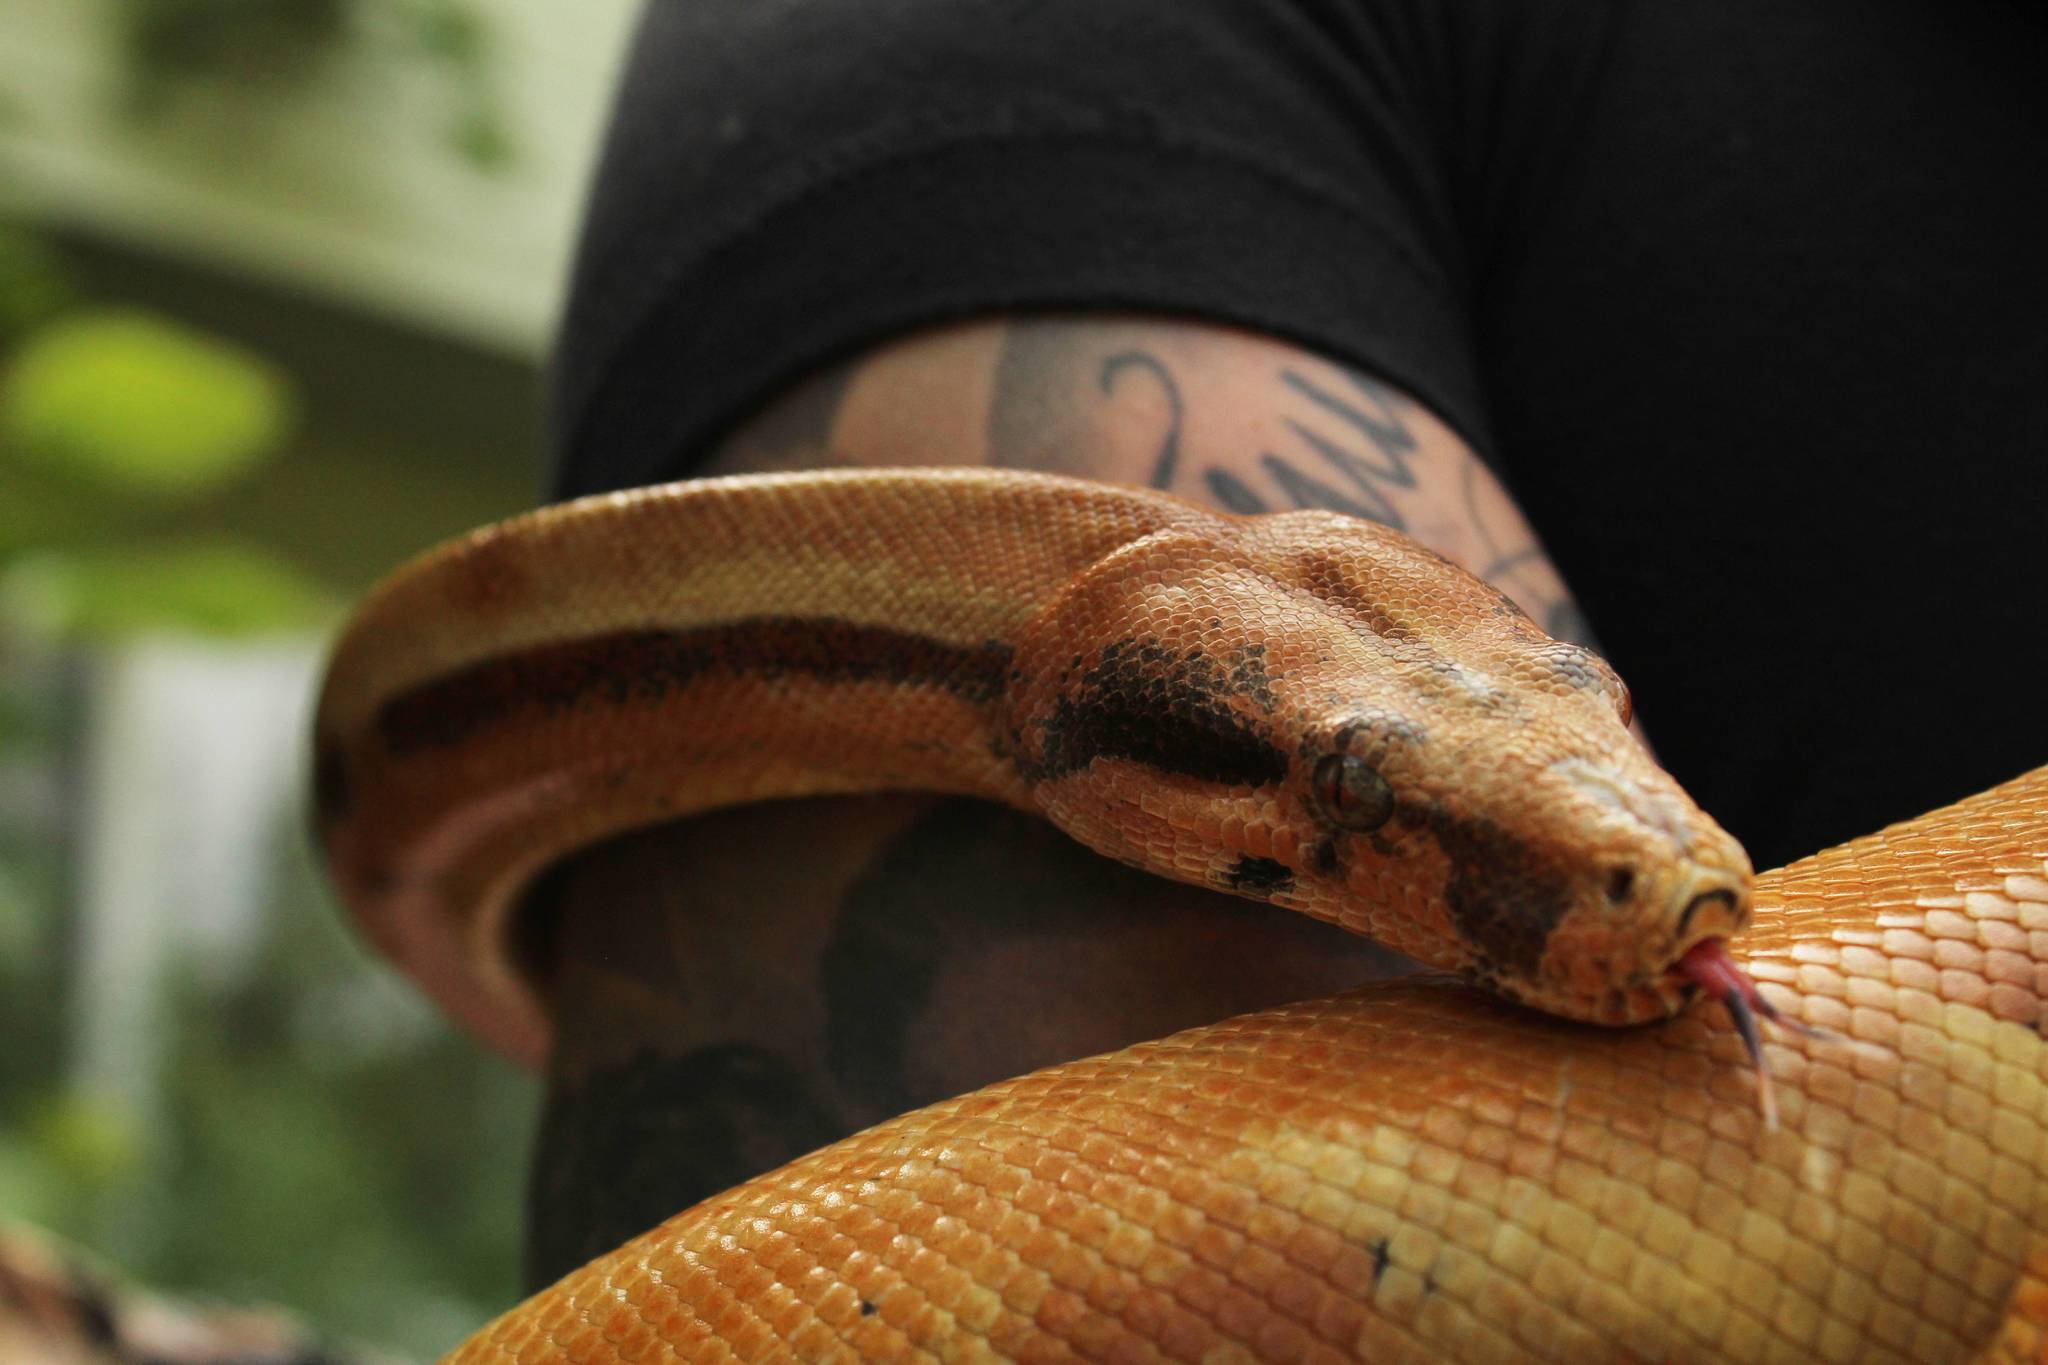 Spot the boa constrictor wraps around owner Amanda Ferrara’s arm. (Photo by Karina Andrew/Whidbey News-Times)